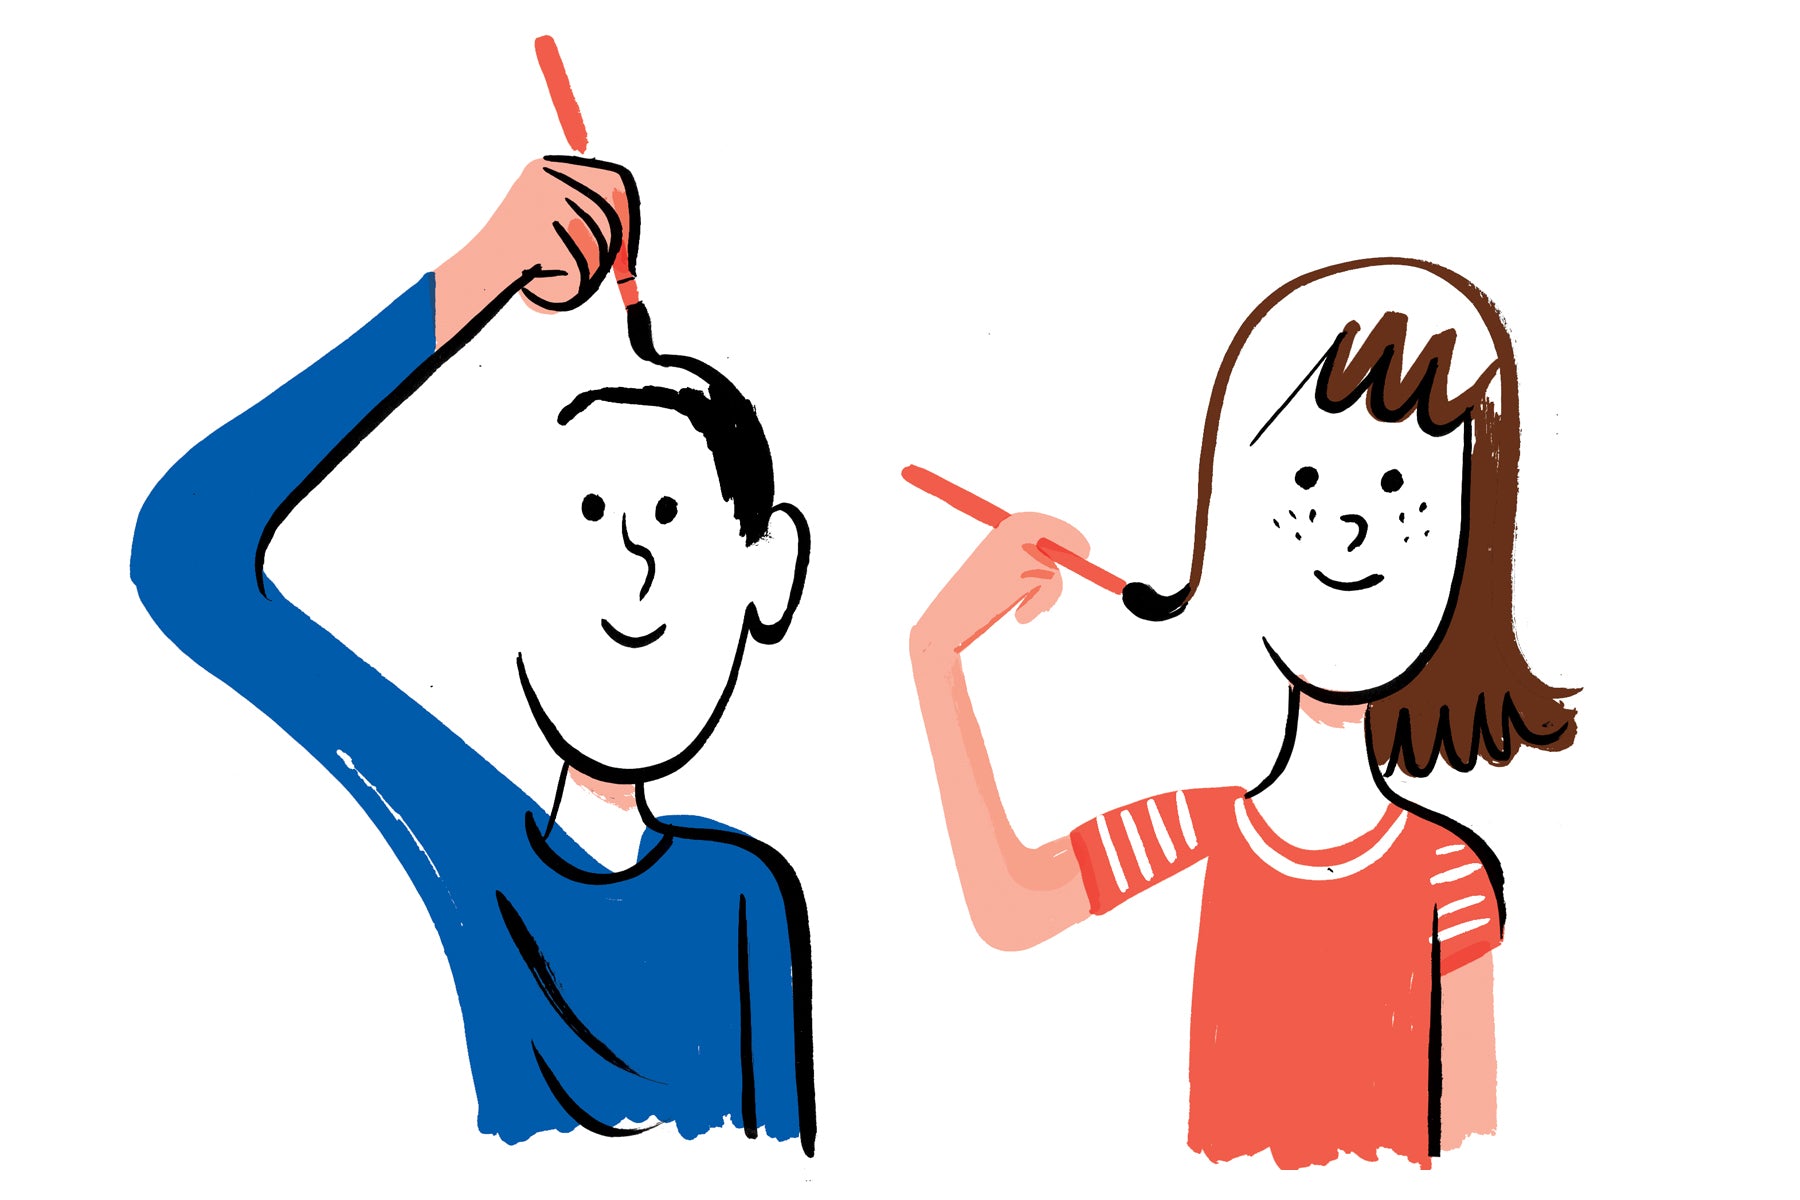 Illustration of a young boy with a blue shirt on and a young girl with a red shirt on drawing their own faces so half of their face is incomplete as they paint in the details themselves.